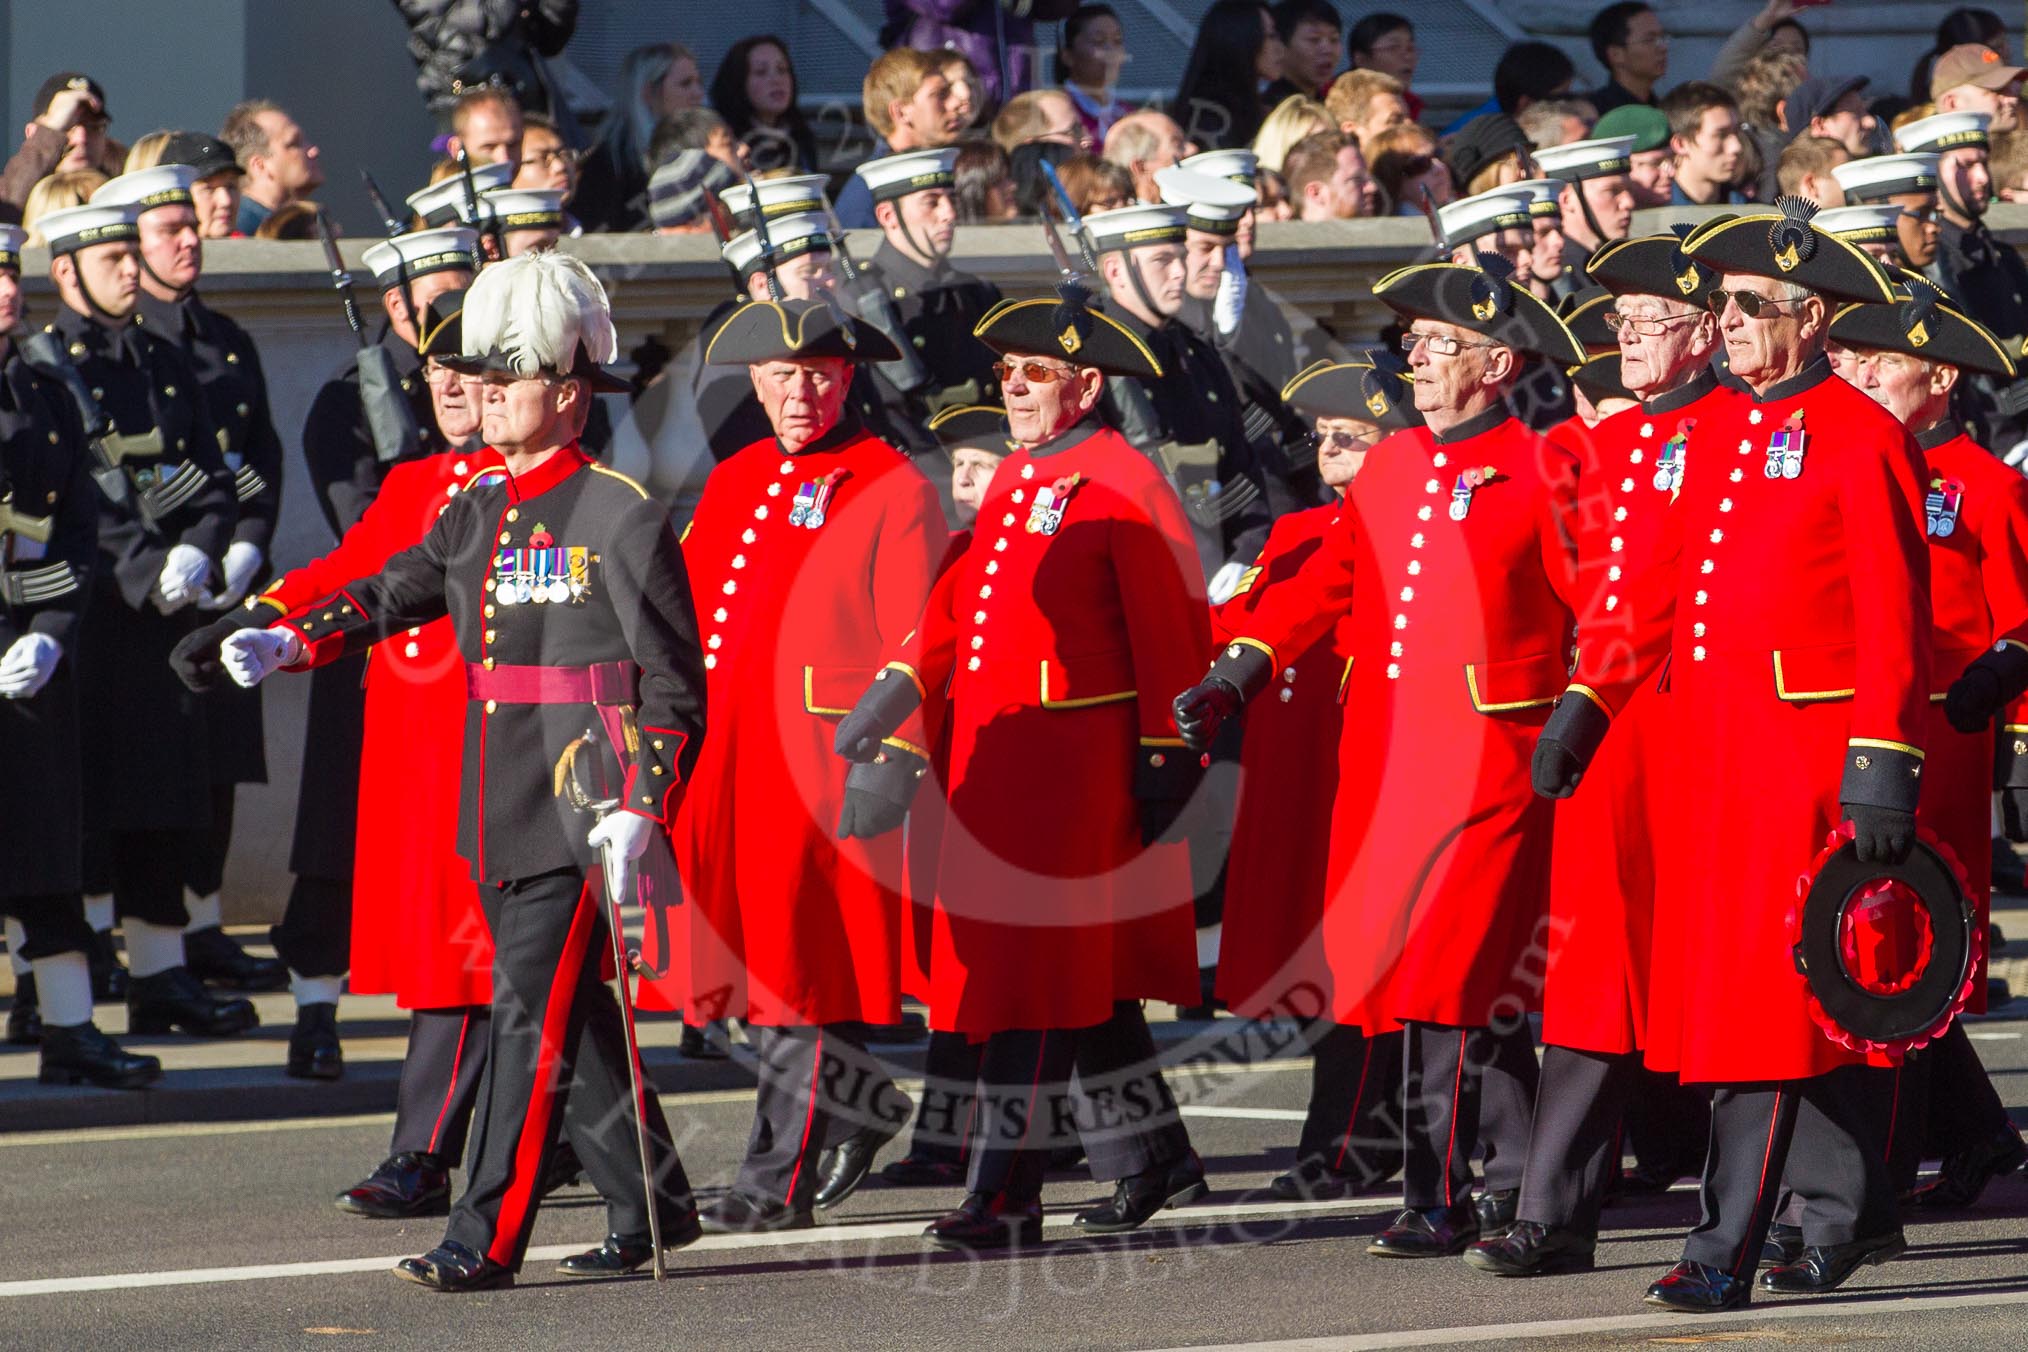 Remembrance Sunday 2012 Cenotaph March Past: Group E43 - Royal Hospital, Chelsea (Chelsea Pensioners)..
Whitehall, Cenotaph,
London SW1,

United Kingdom,
on 11 November 2012 at 11:43, image #334